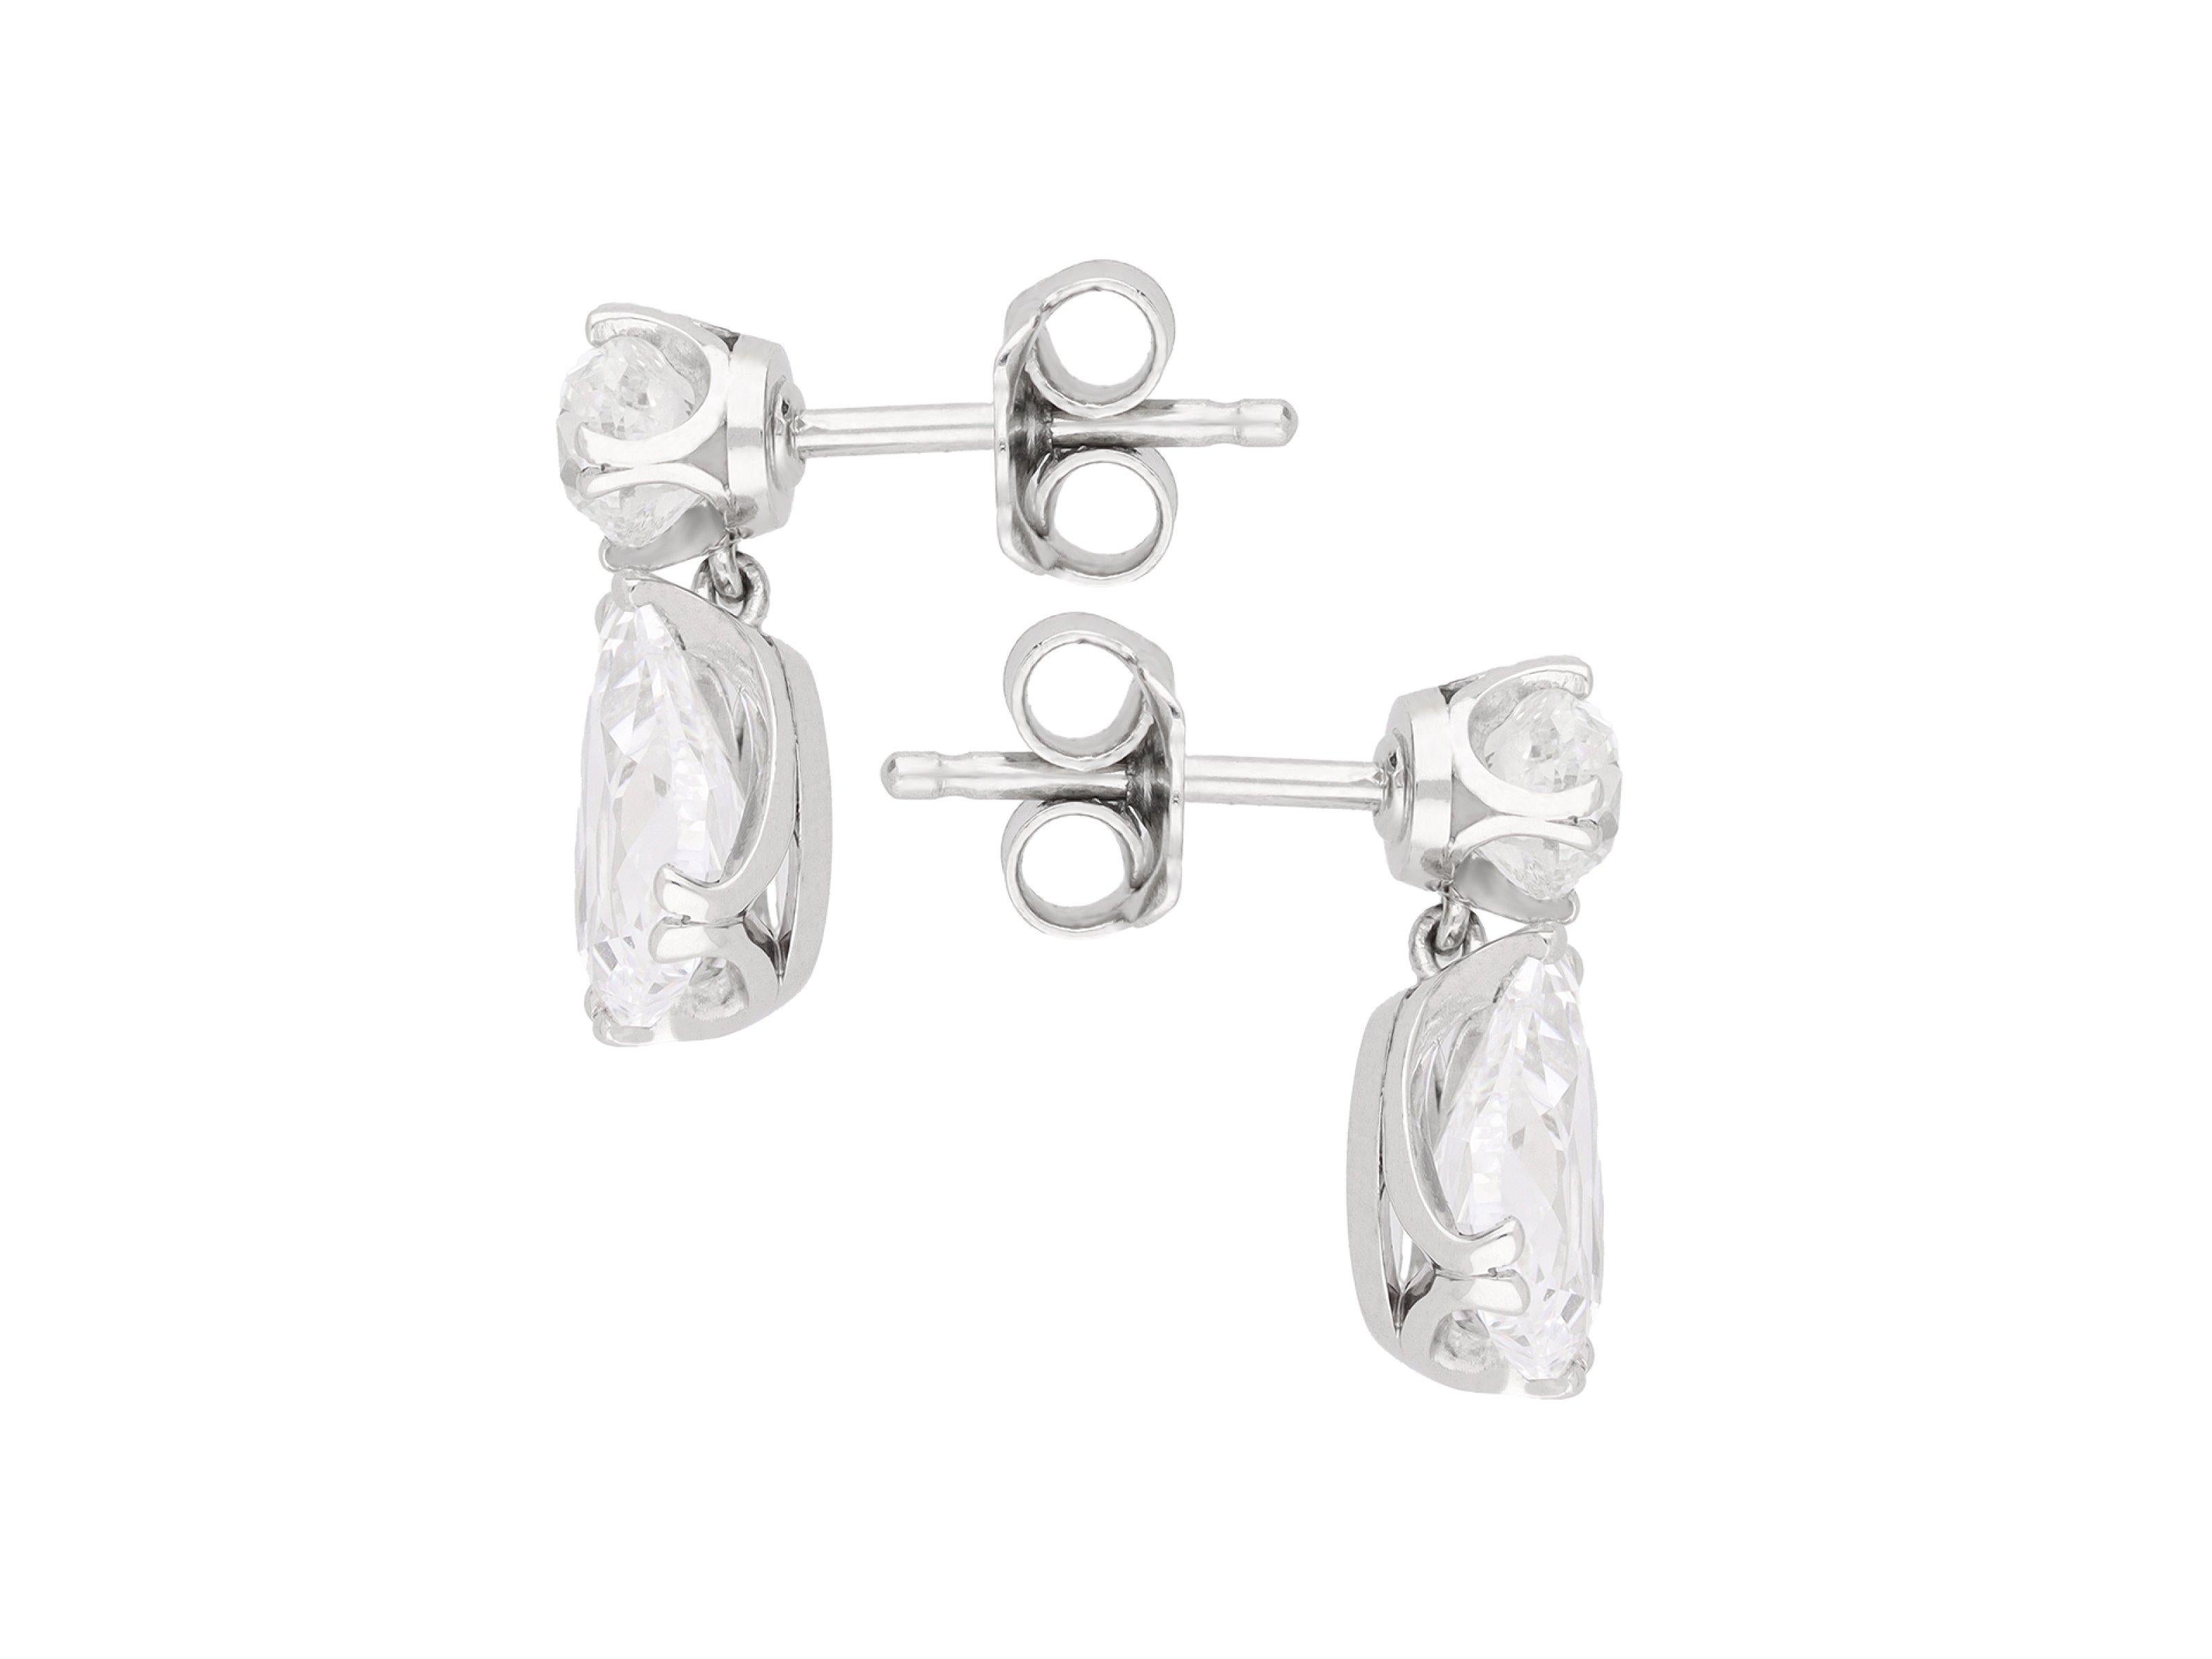 Drop shape old mine diamond earrings. A matching pair, set with a drop shape old mine diamond in an open back claw setting, two in total, one D colour, SI1 clarity with a weight of 1.51 carats, the other D colour, SI2 clarity with a weight of 1.50